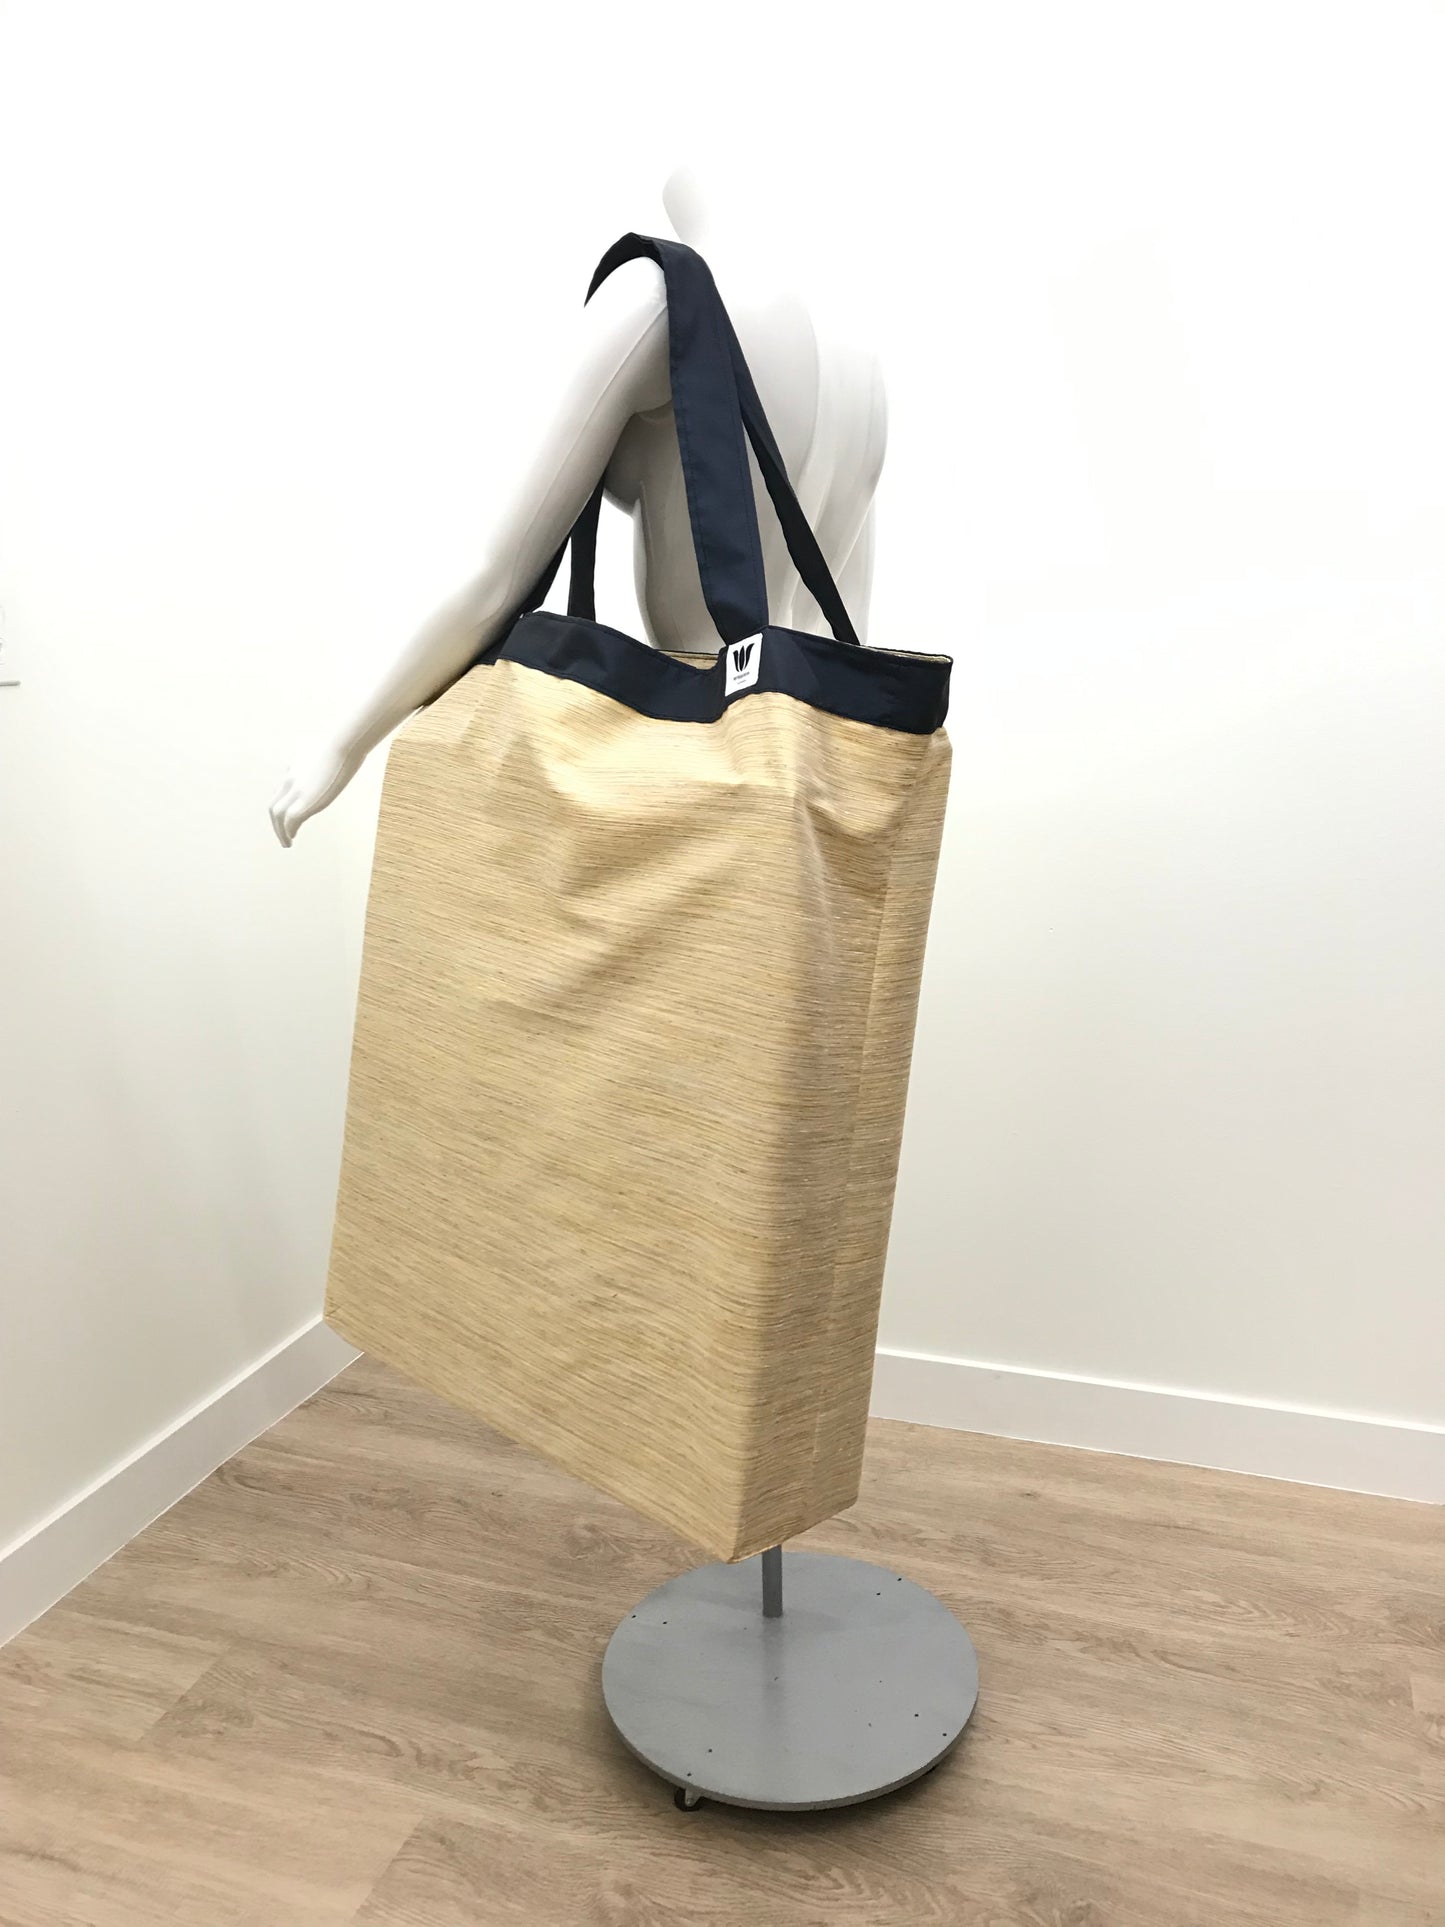 Extra Large Yoga Tote Bag in yellow gold stripe subtle fabric to carry and or store yoga props for yoga practice. Made in Canada by My Yoga Room Elements